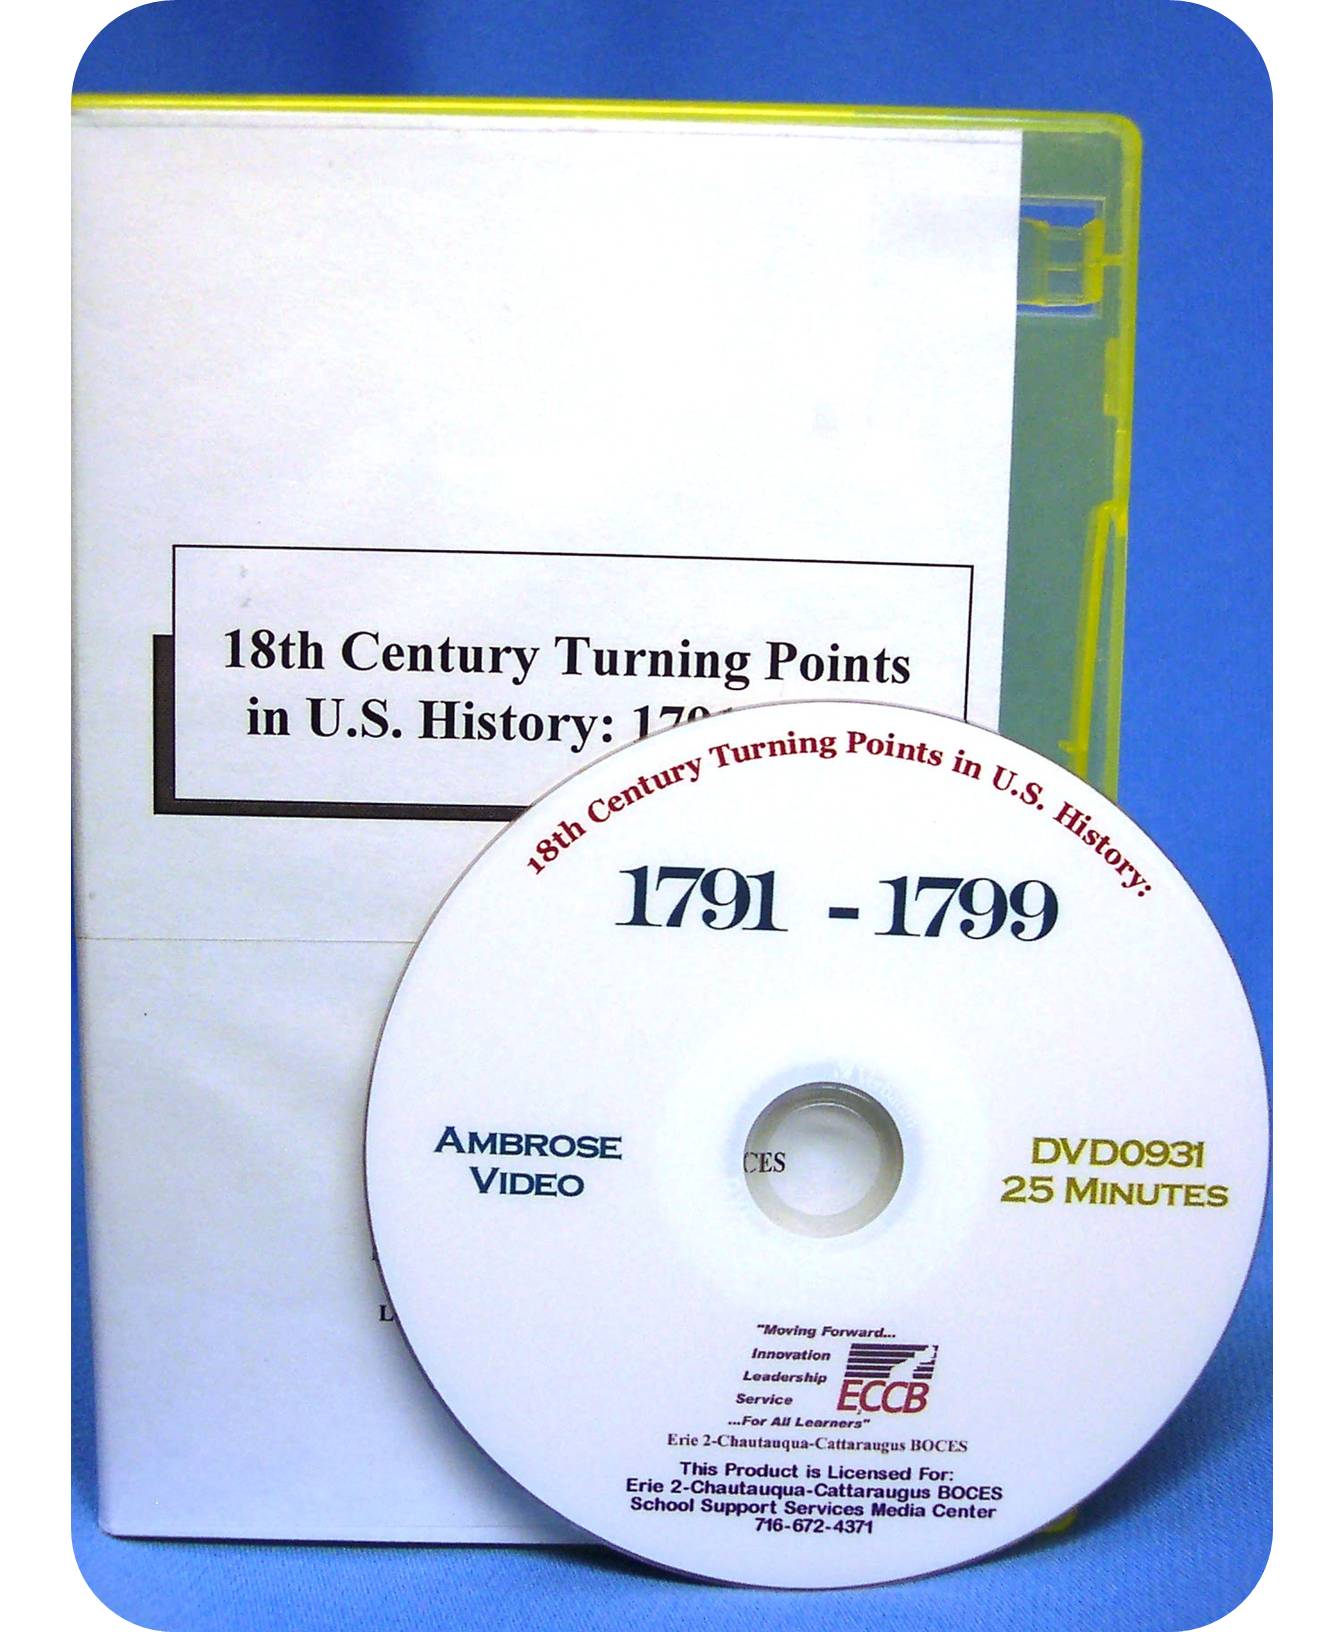 18th Century Turning Points in U.S. History: 1791- 1799